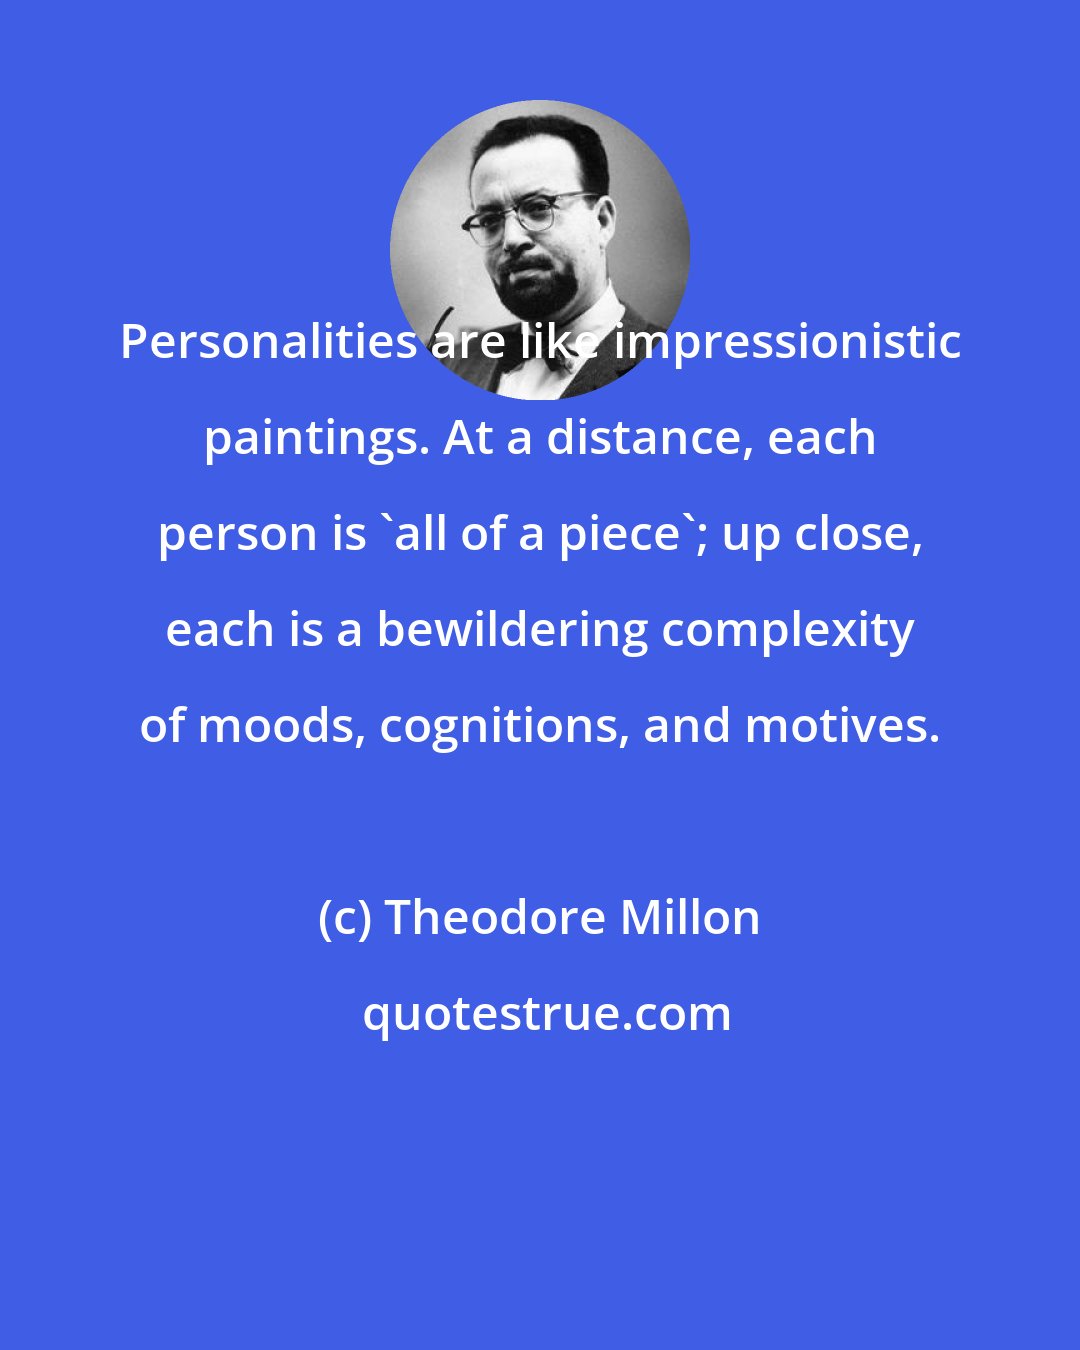 Theodore Millon: Personalities are like impressionistic paintings. At a distance, each person is 'all of a piece'; up close, each is a bewildering complexity of moods, cognitions, and motives.